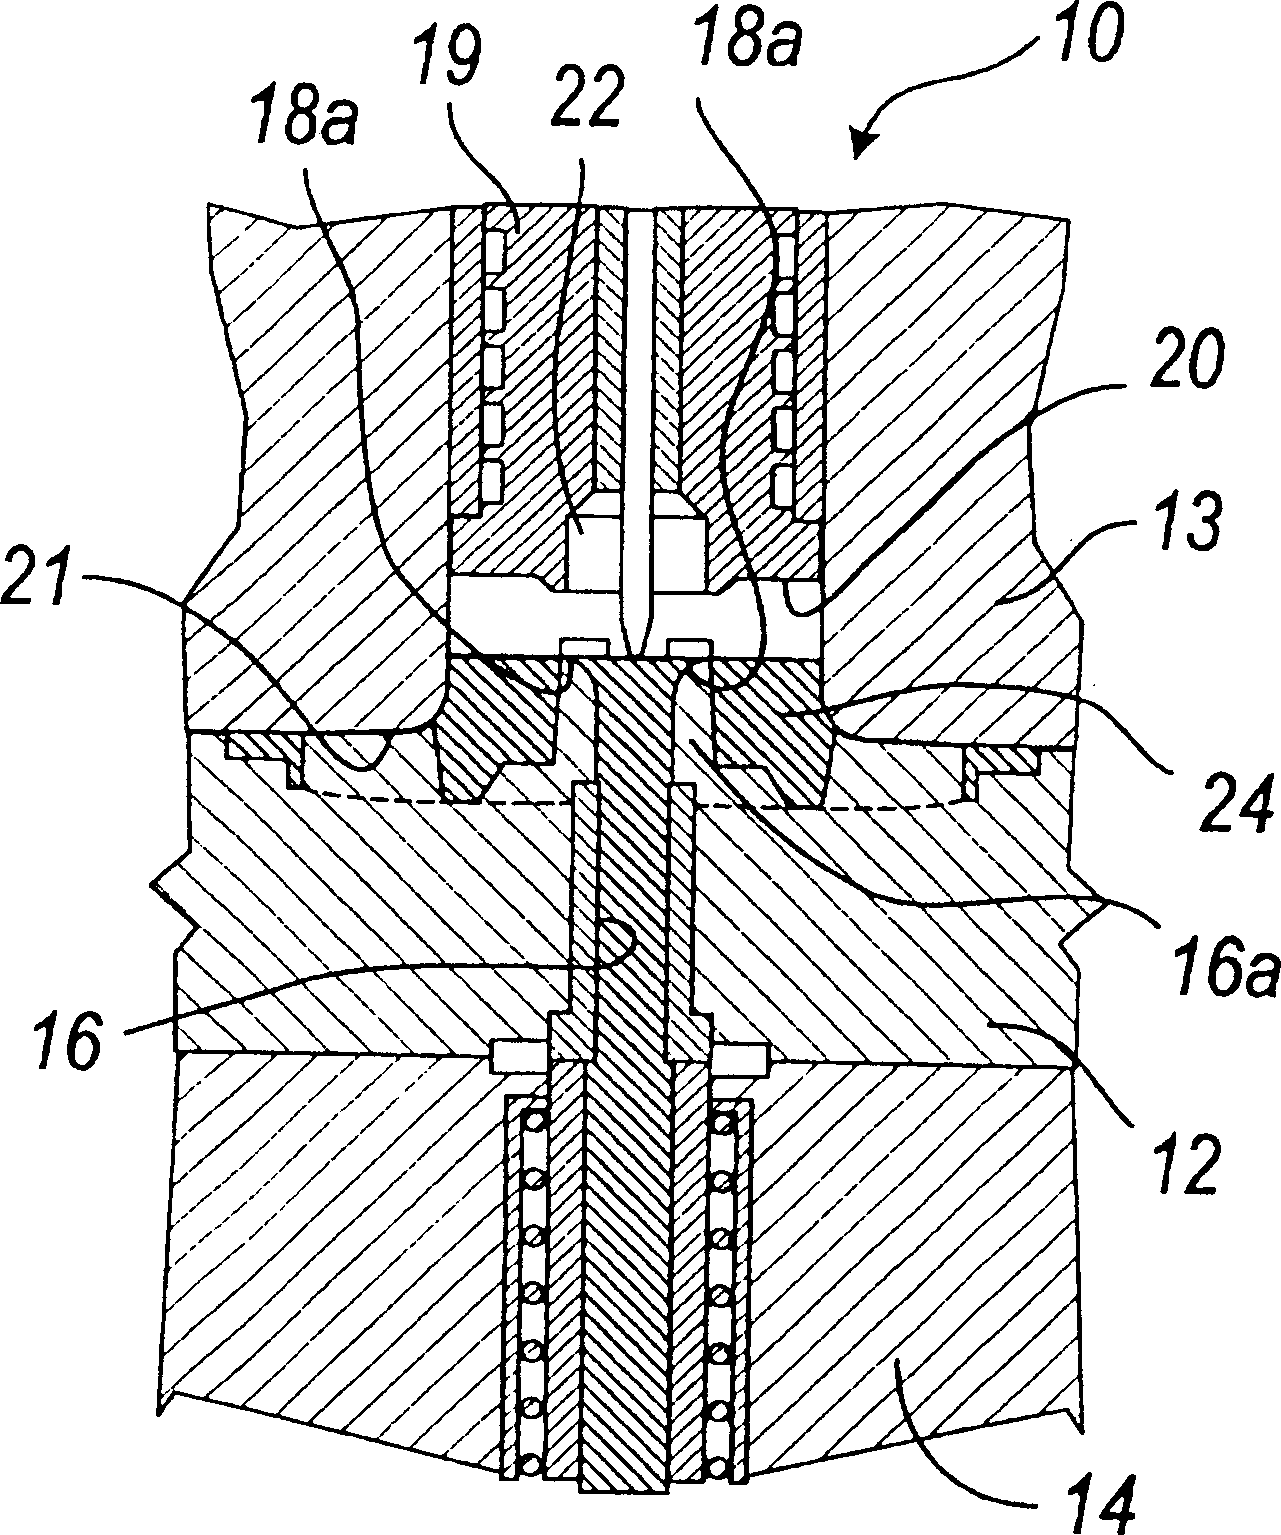 Apparatus for manufacturing articles made of light alloys and the like, and method performed by the apparatus